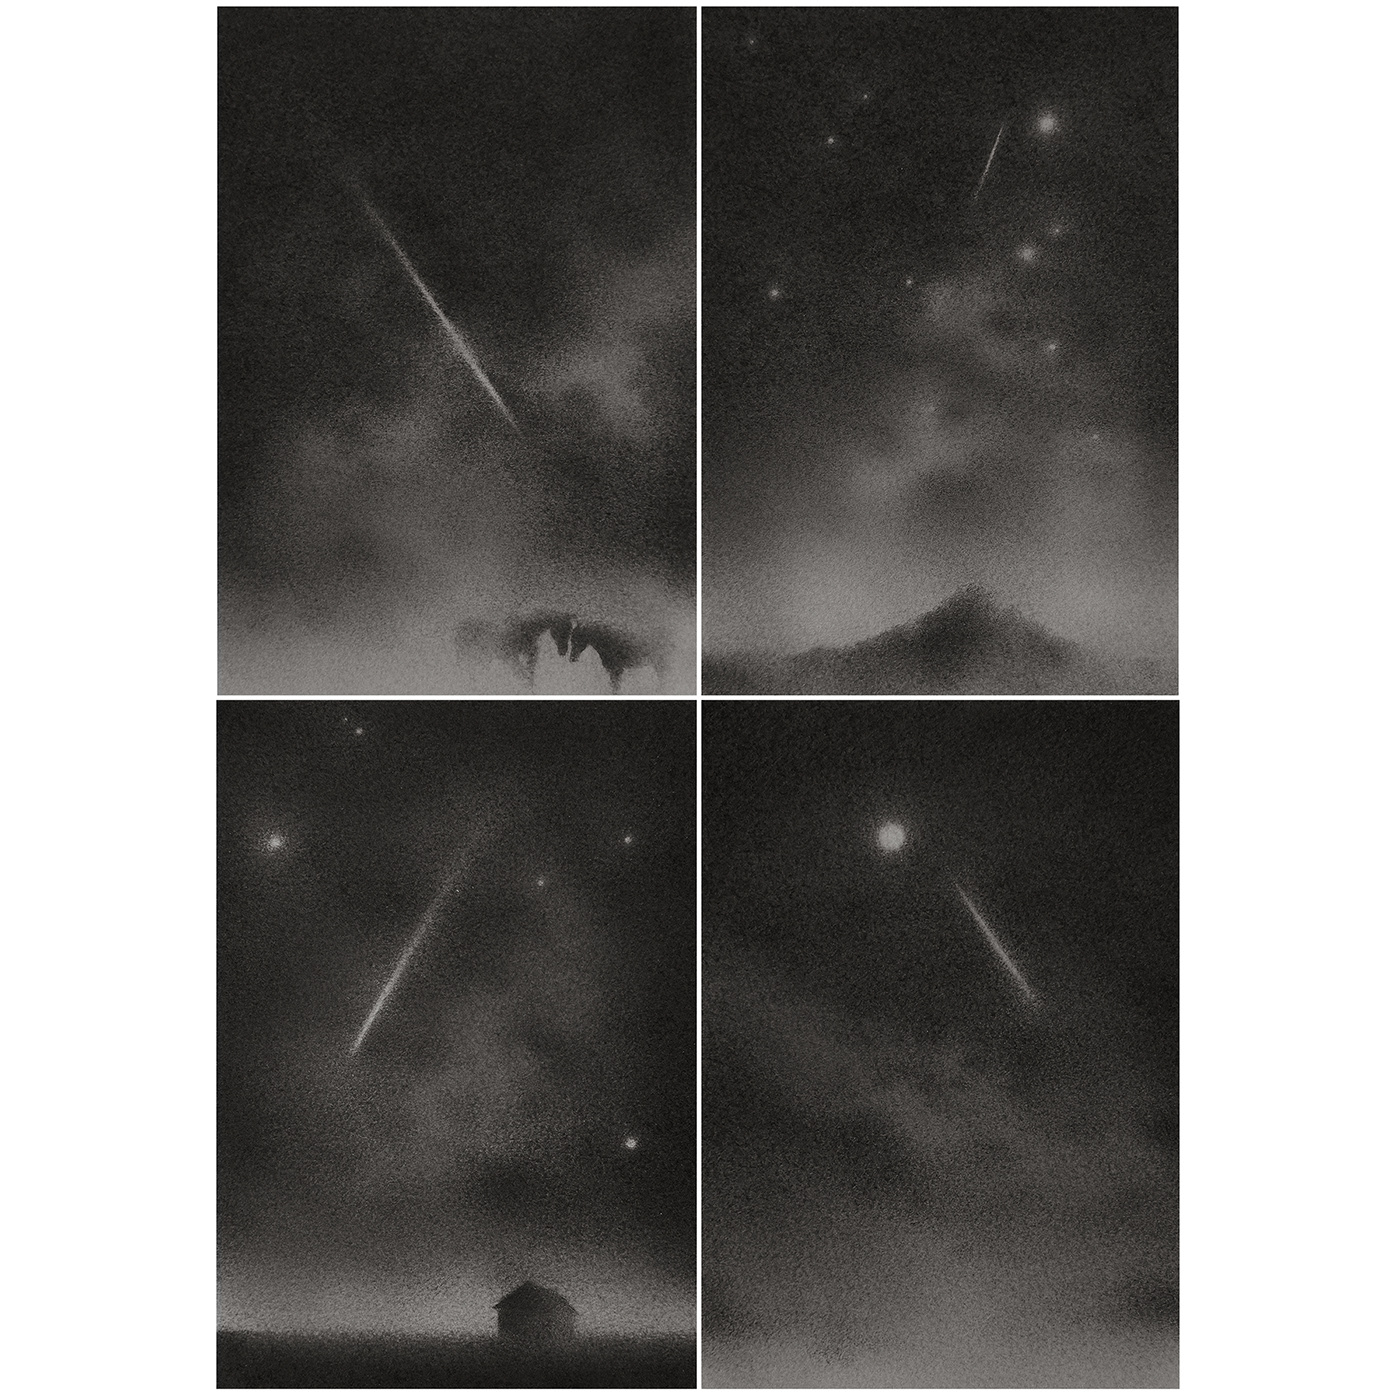 drawings bw blackandwhite Space  astronomy stars universe Nature pencil graphite